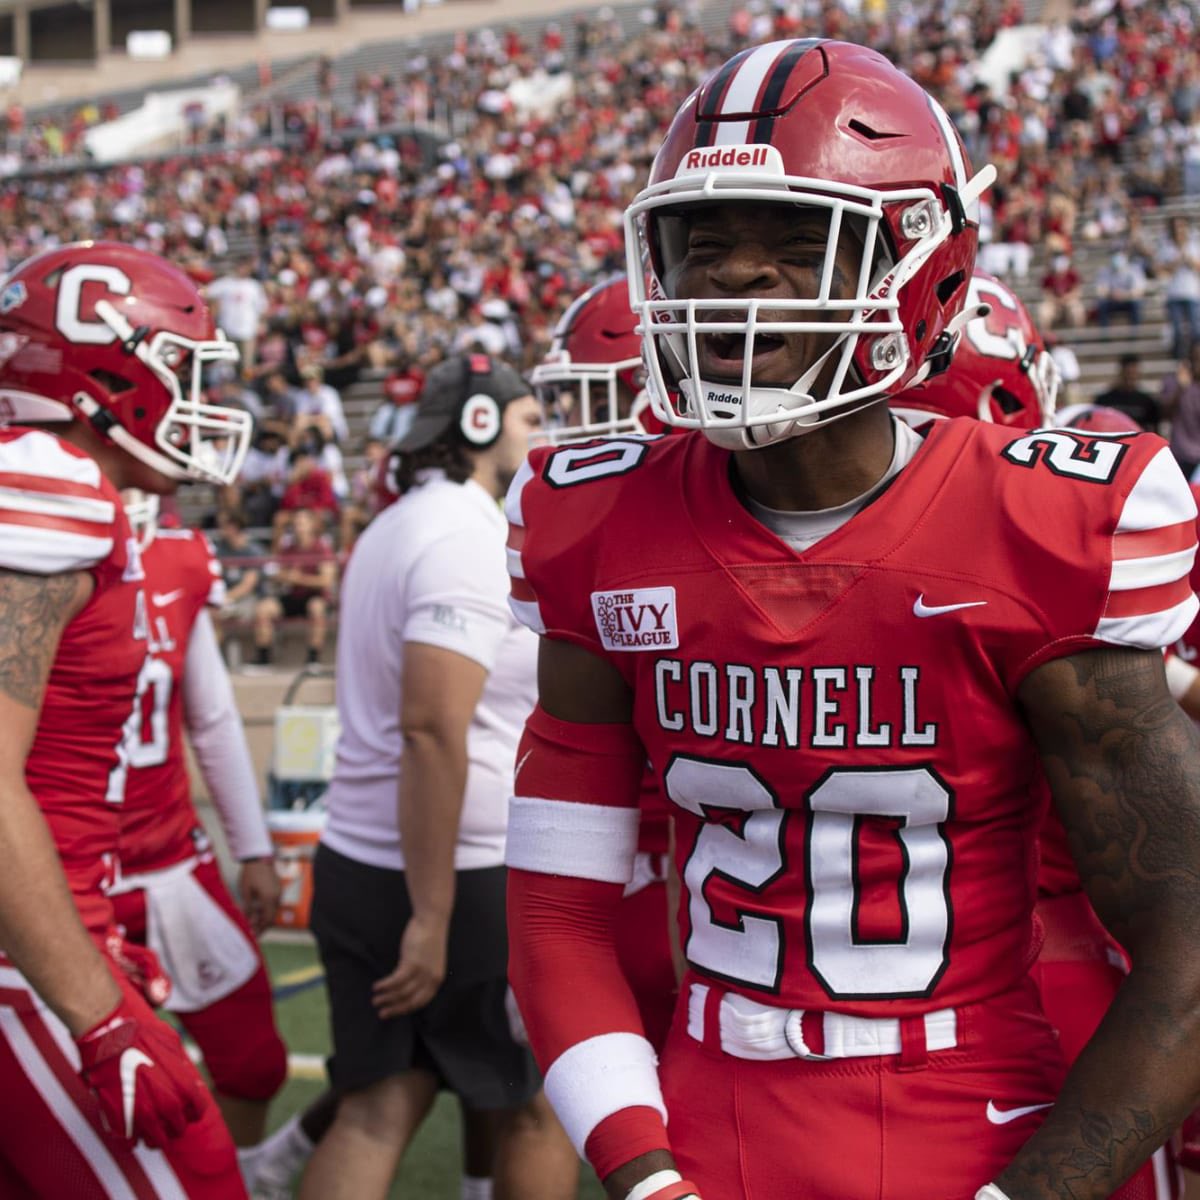 AGTG🙏🏾… Blessed ✞o Receive my 5th Division 1 offer from Cornell University 🔴⚪️ @CoachEFranklin @DanSwanstrom